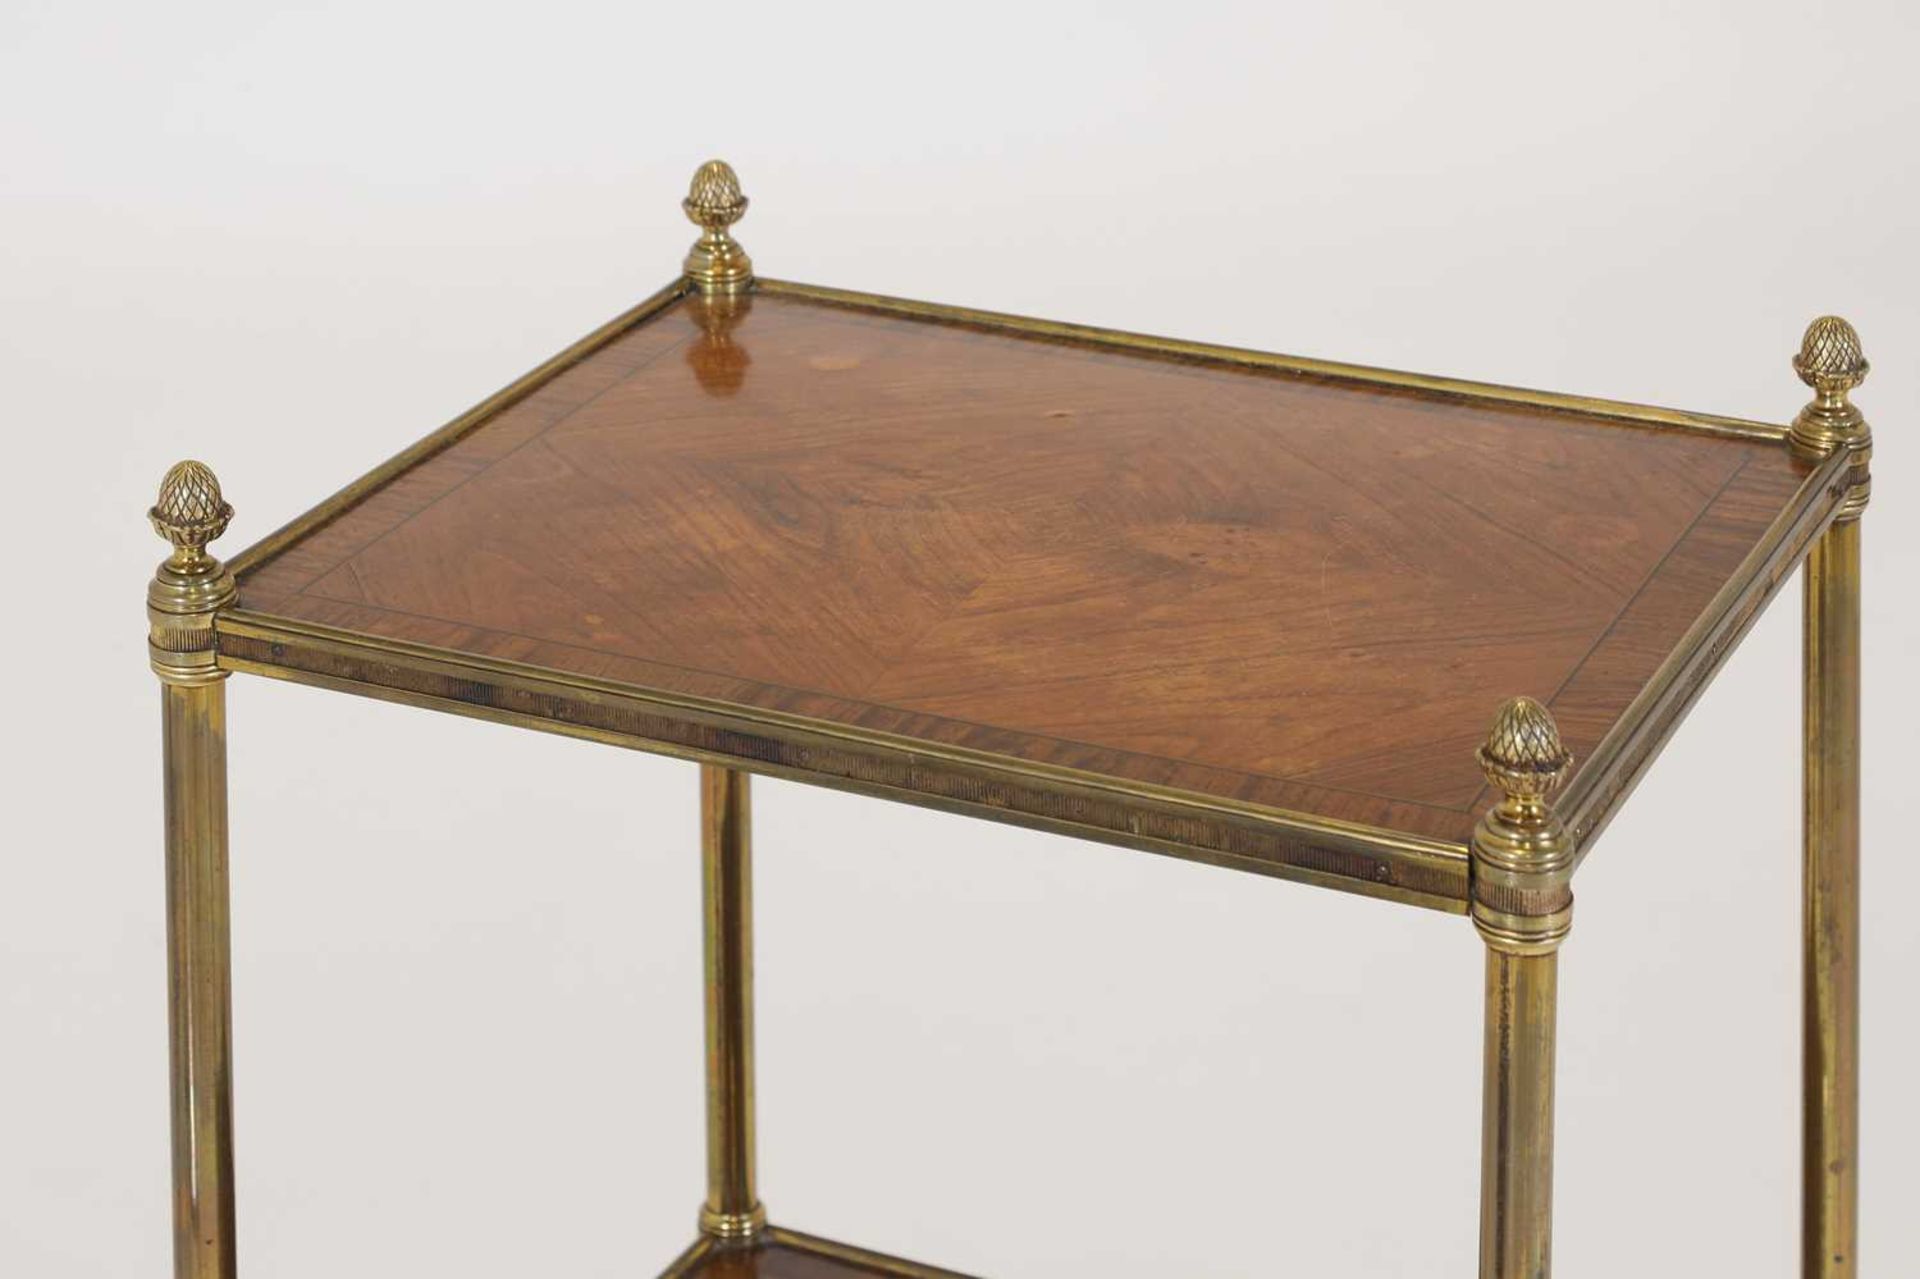 A pair of Regency-style mahogany and brass étagères, - Image 10 of 19